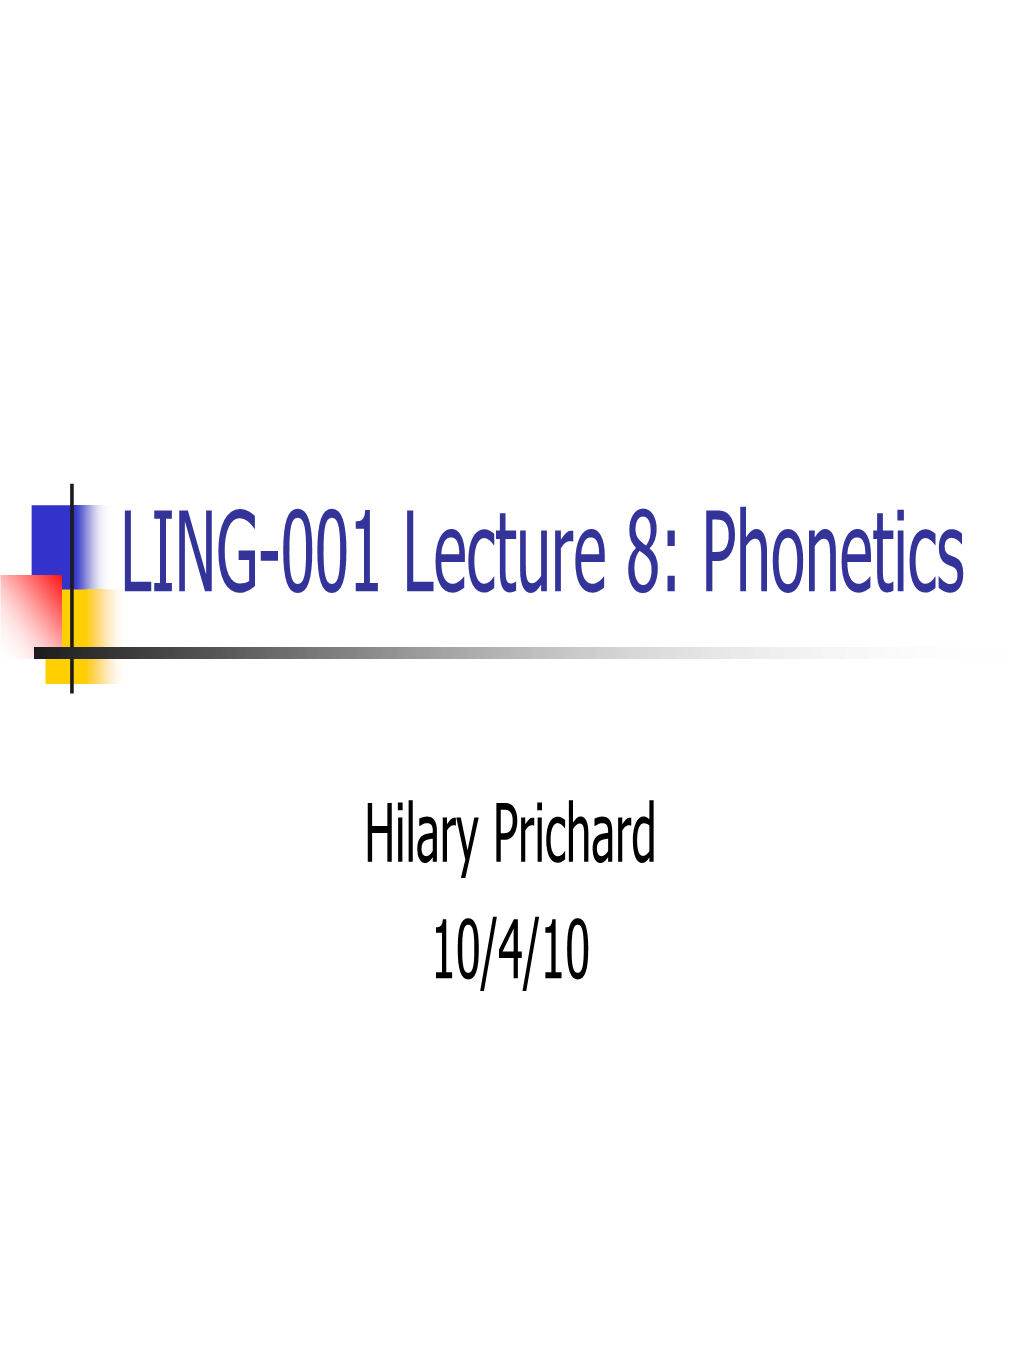 LING-001 Lecture 8: Phonetics